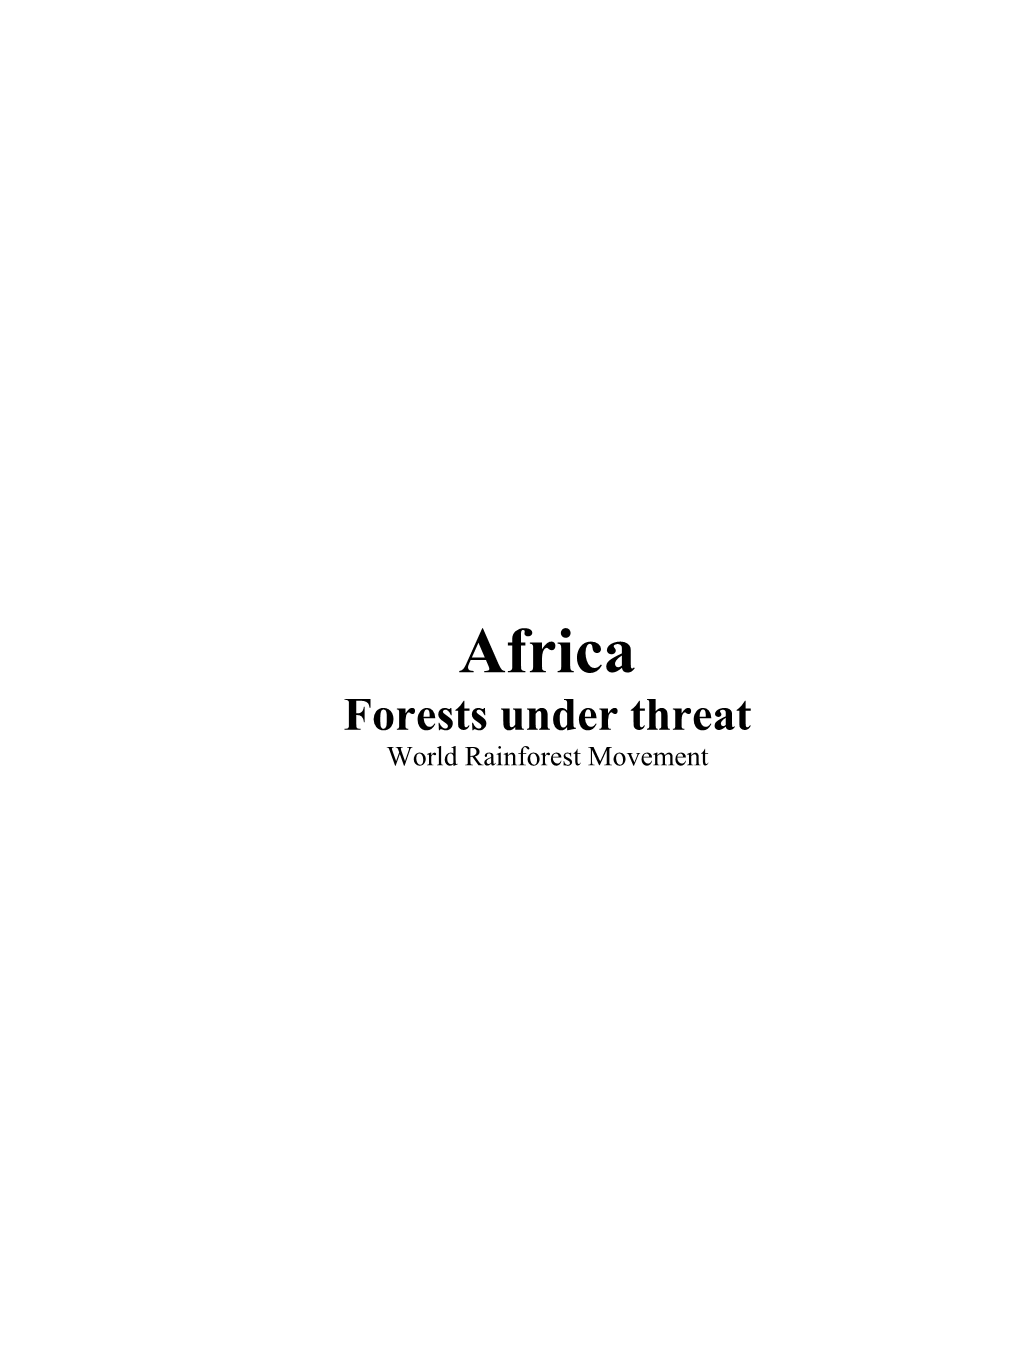 Africa Forests Under Threat World Rainforest Movement General Coordination: Ricardo Carrere Edited By: Hersilia Fonseca Cover Design: Flavio Pazos